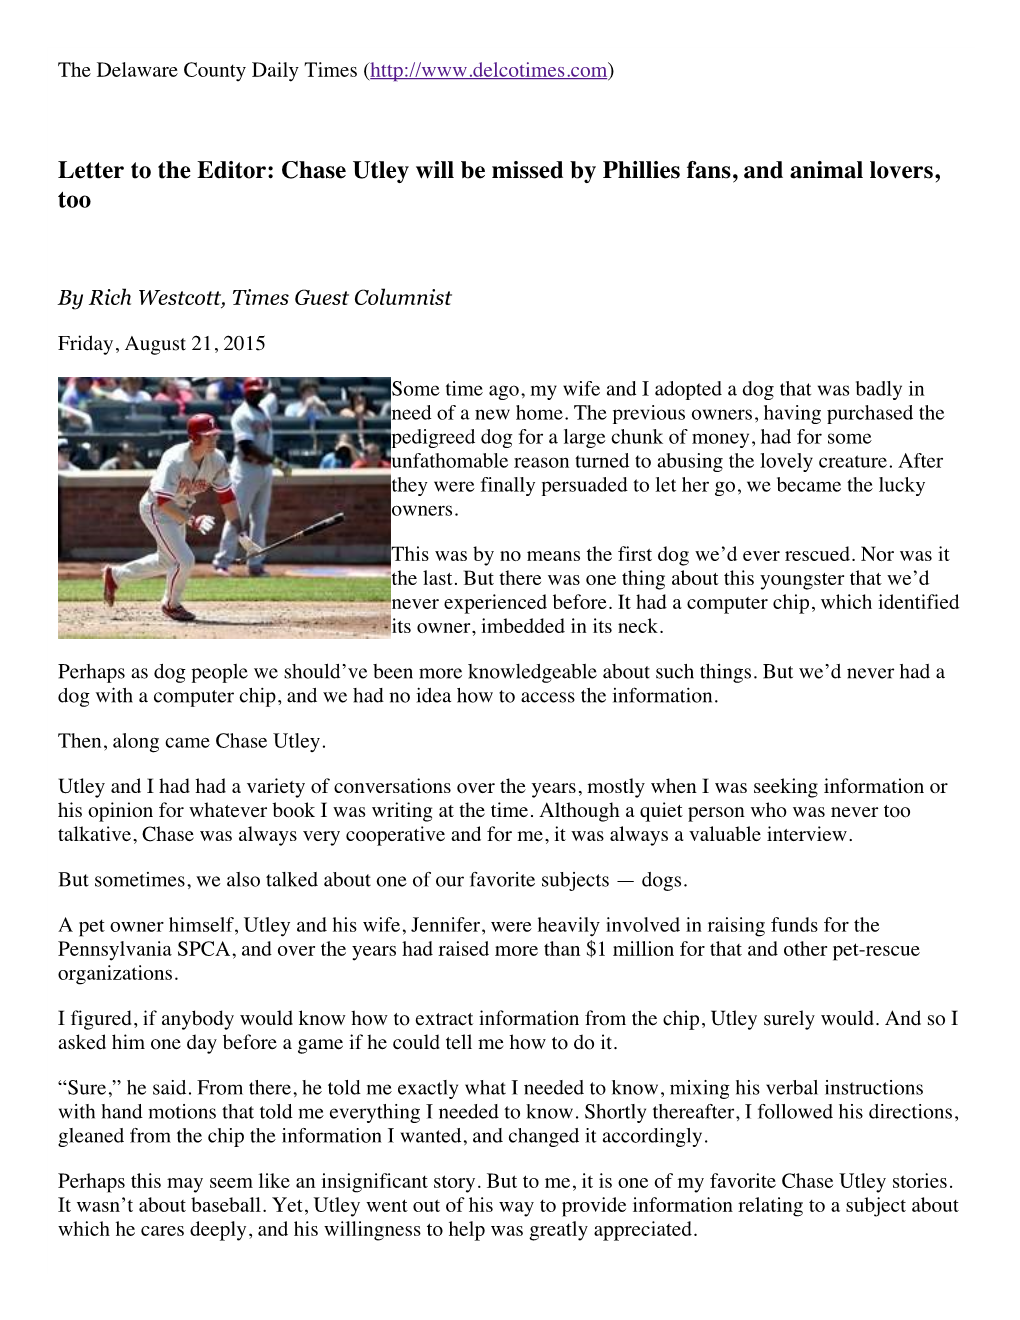 Letter to the Editor: Chase Utley Will Be Missed by Phillies Fans, and Animal Lovers, Too